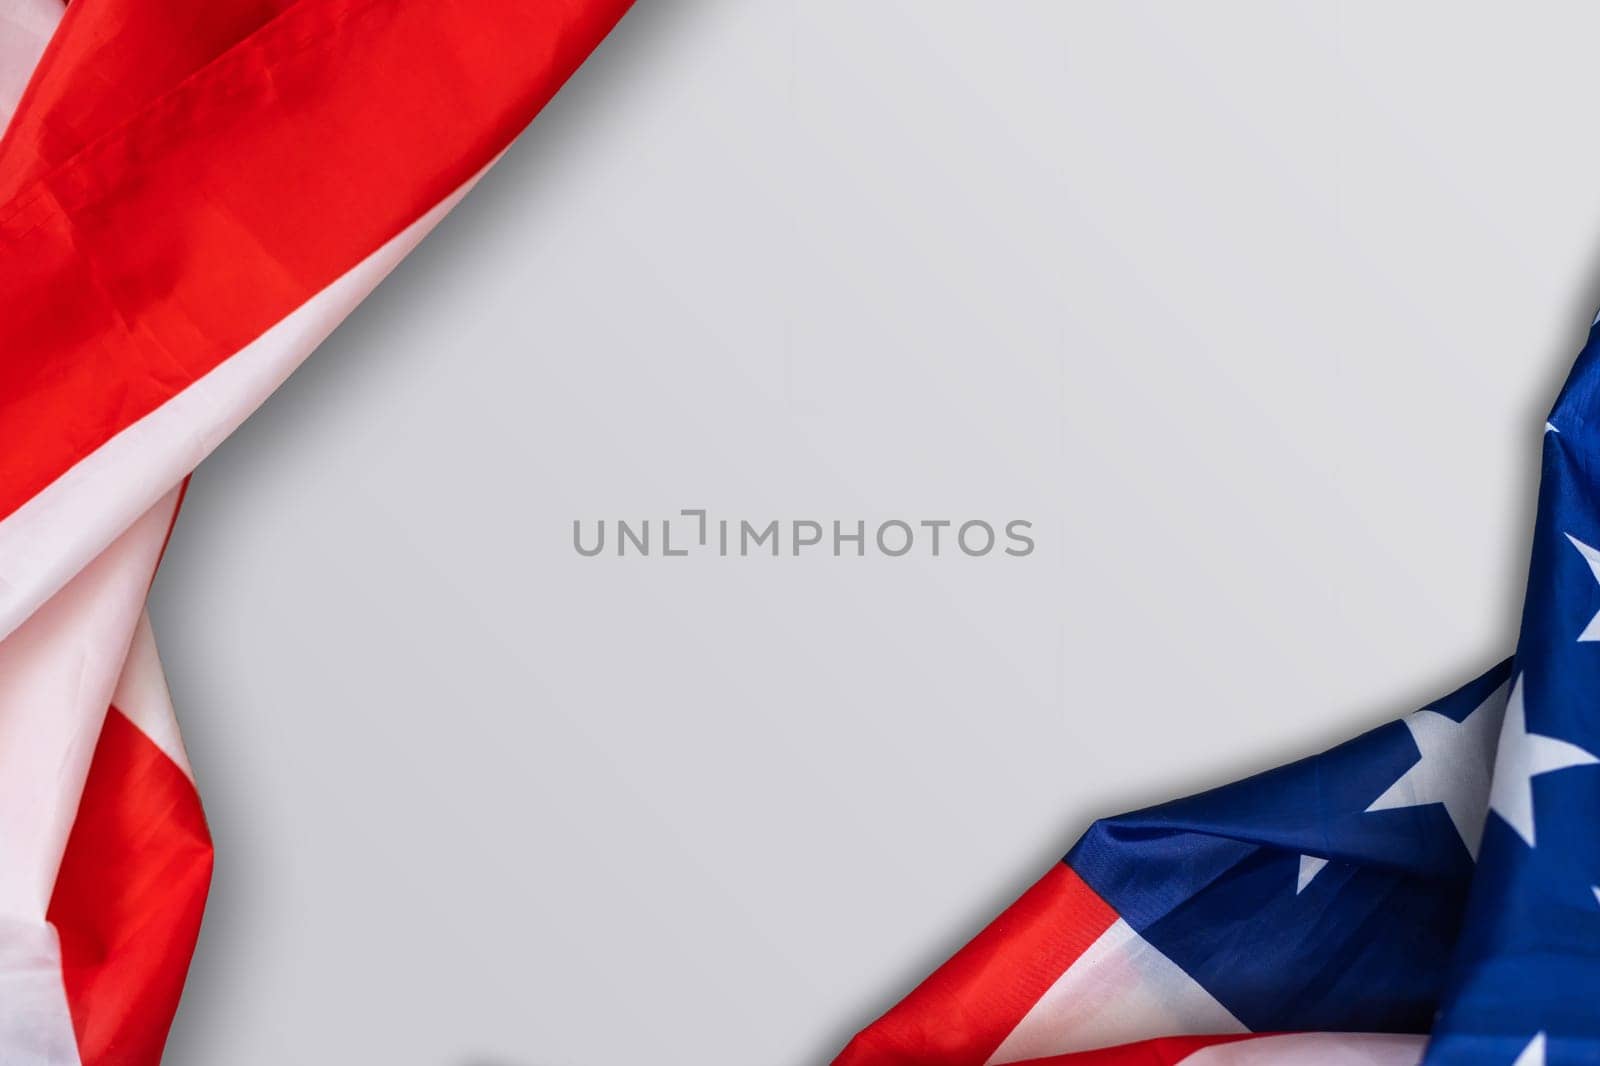 Closeup of American flag on plain background.